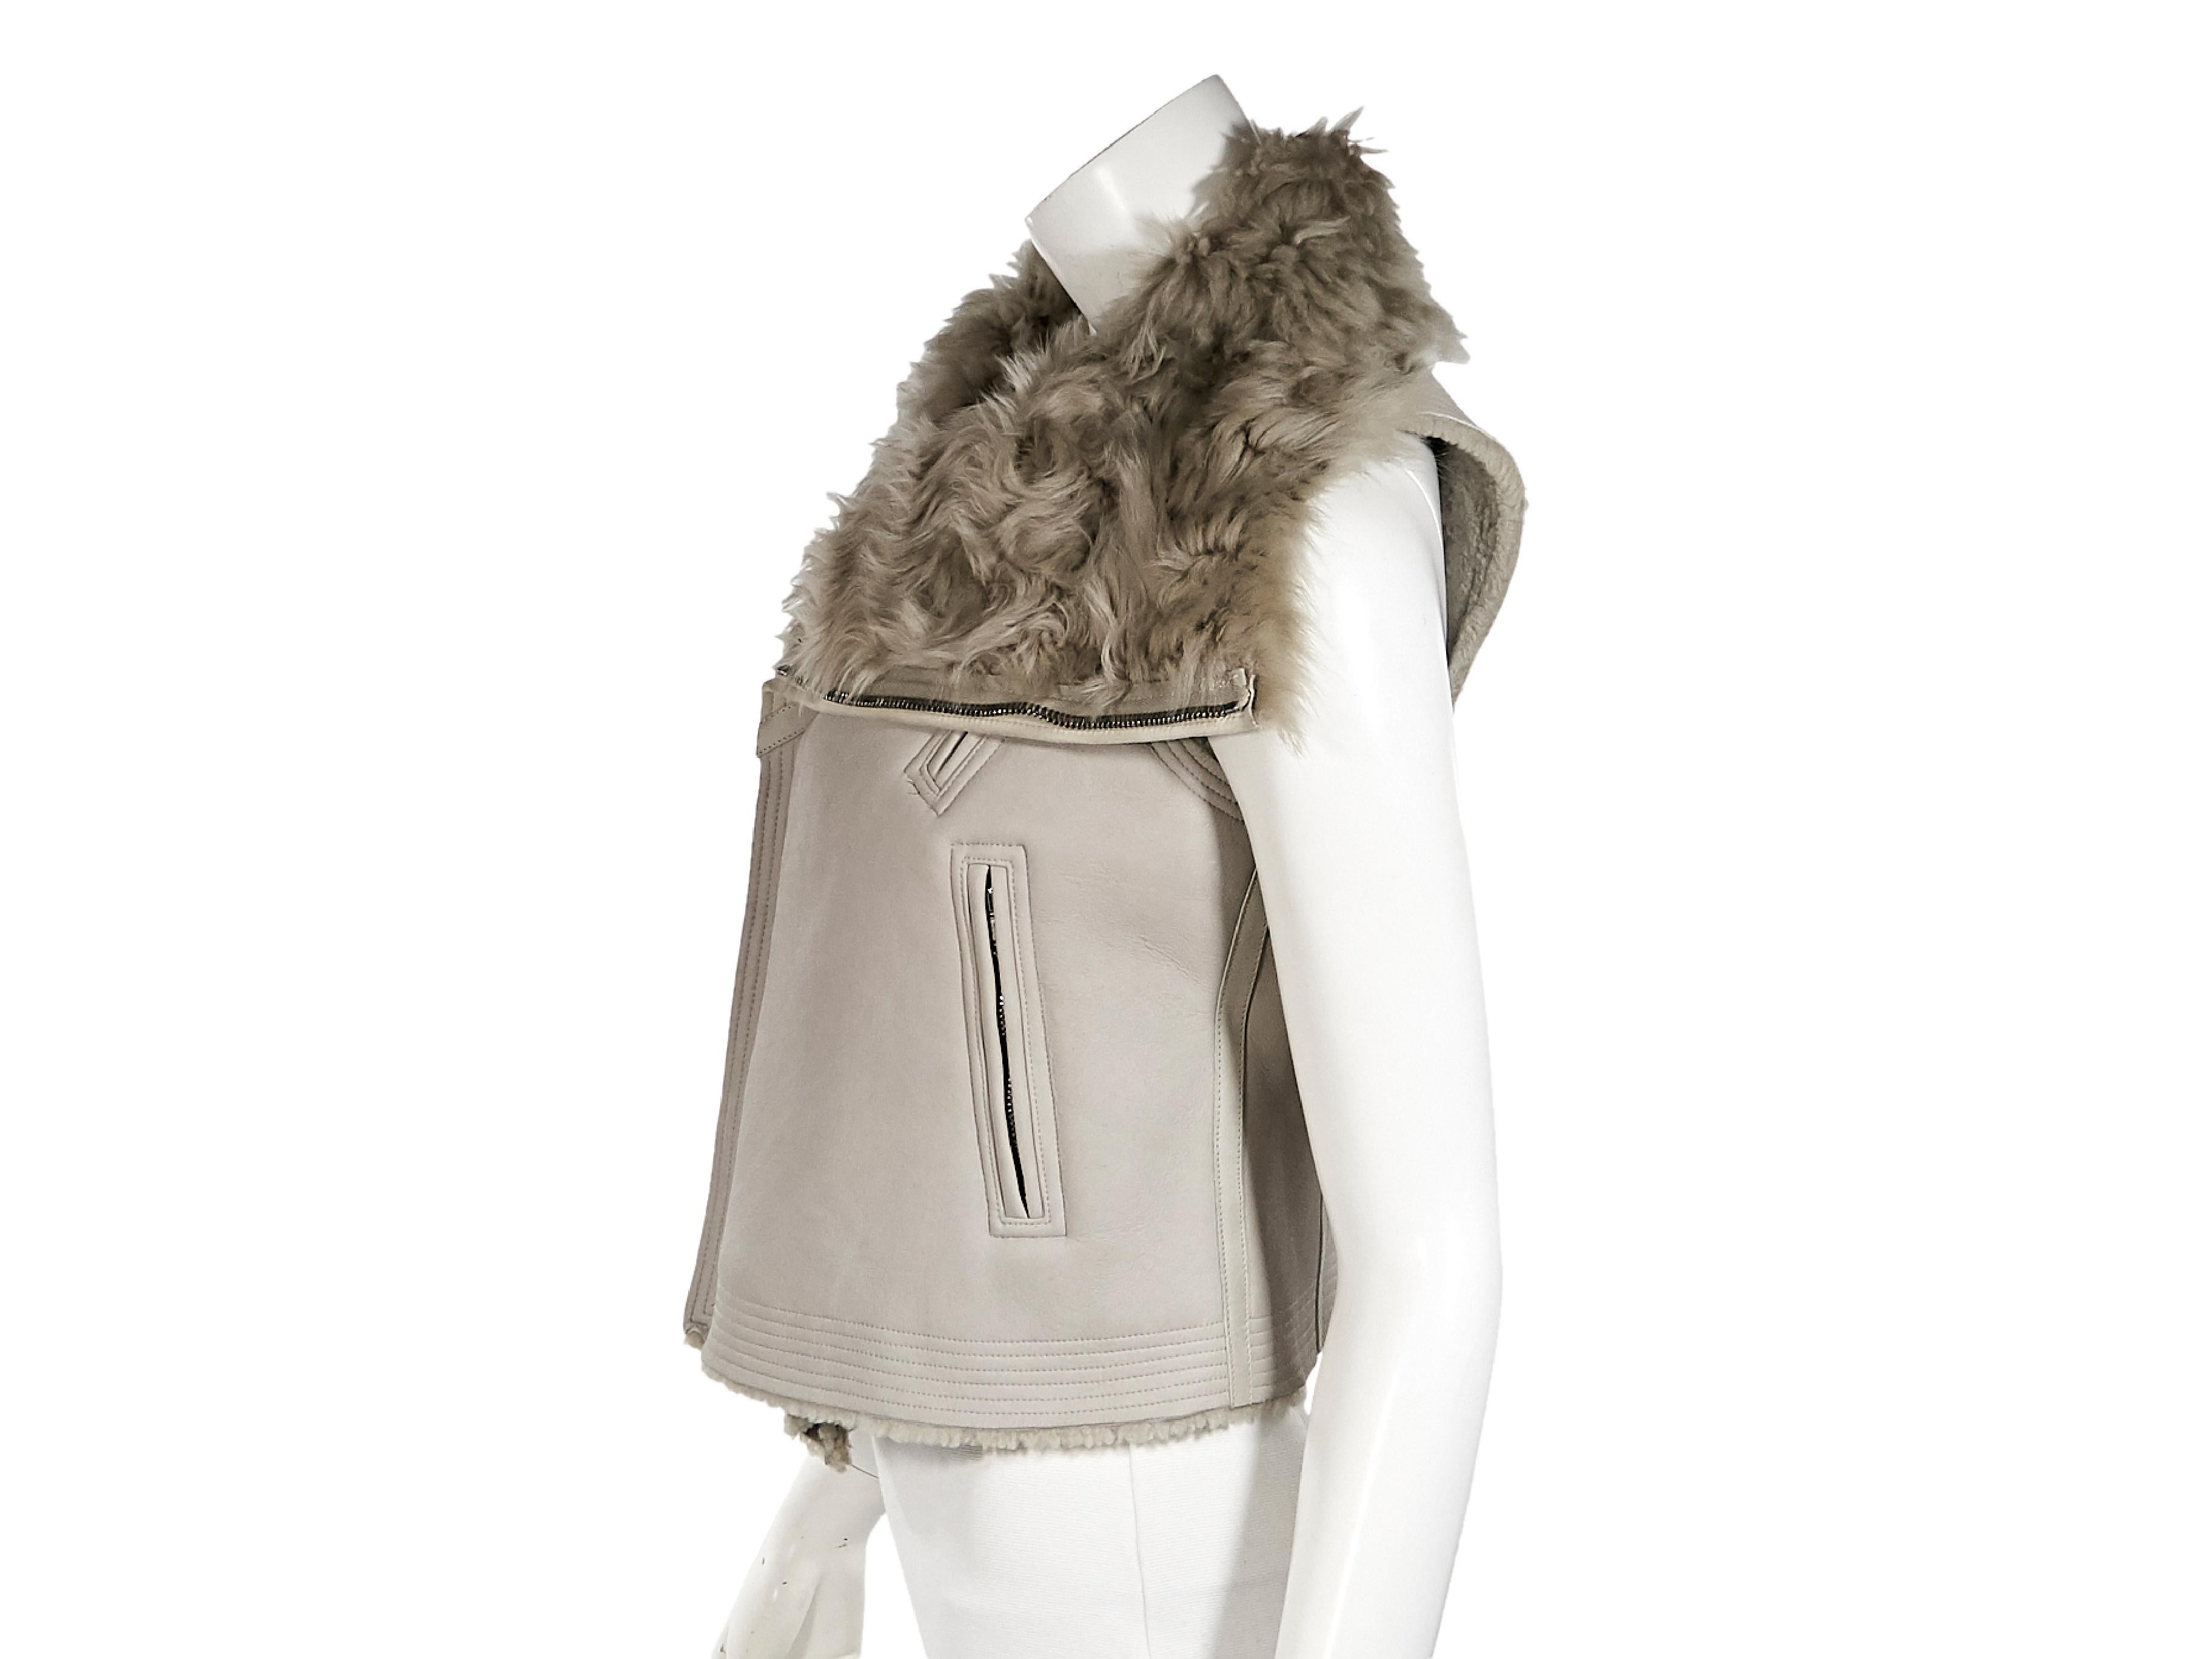 Product details:  Beige shearling vest by Rick Owens.  Asymmetrical zip-front closure.  Chest and waist zip pockets.  Silvertone hardware.  31